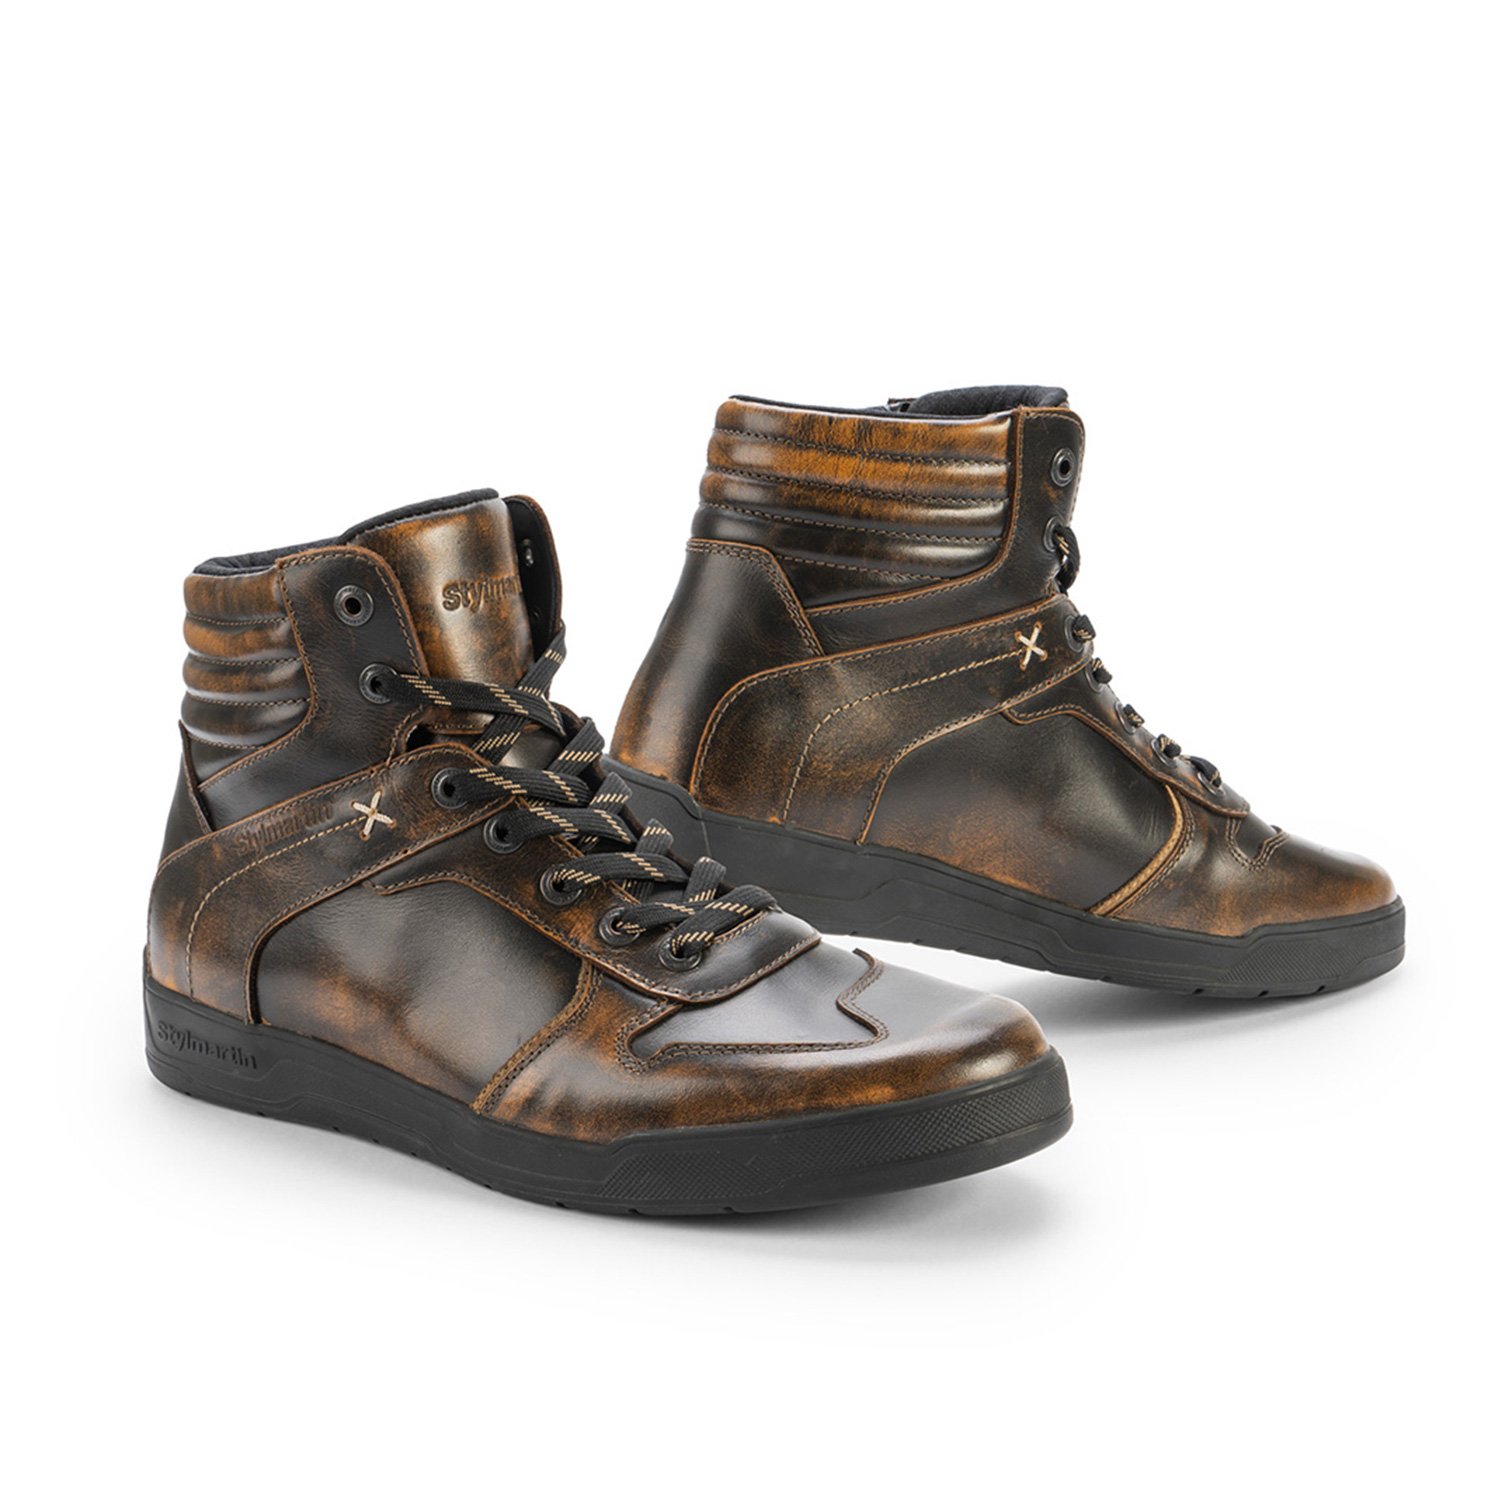 Image of Stylmartin Iron WP Bronze Sneakers Size 41 ID 1000001355504